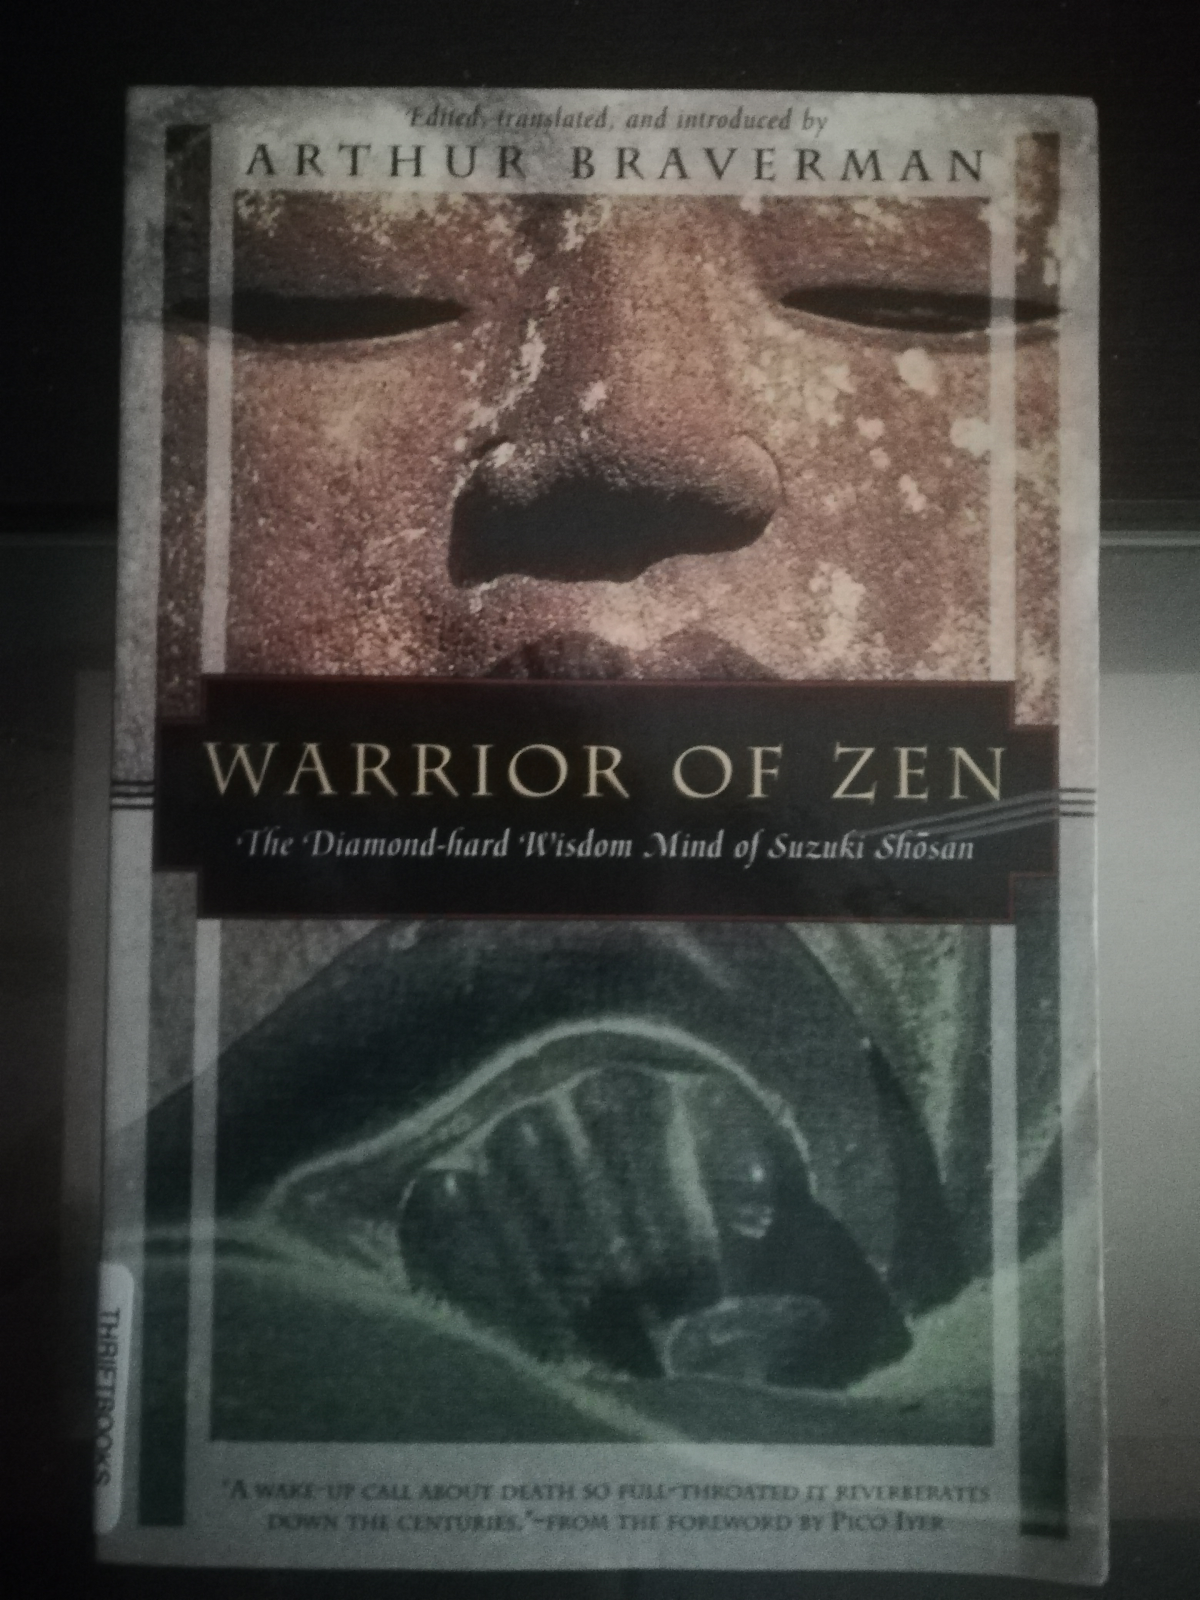 'Warrior of Zen', edited, translated, and introduced by Arthur Braverman.